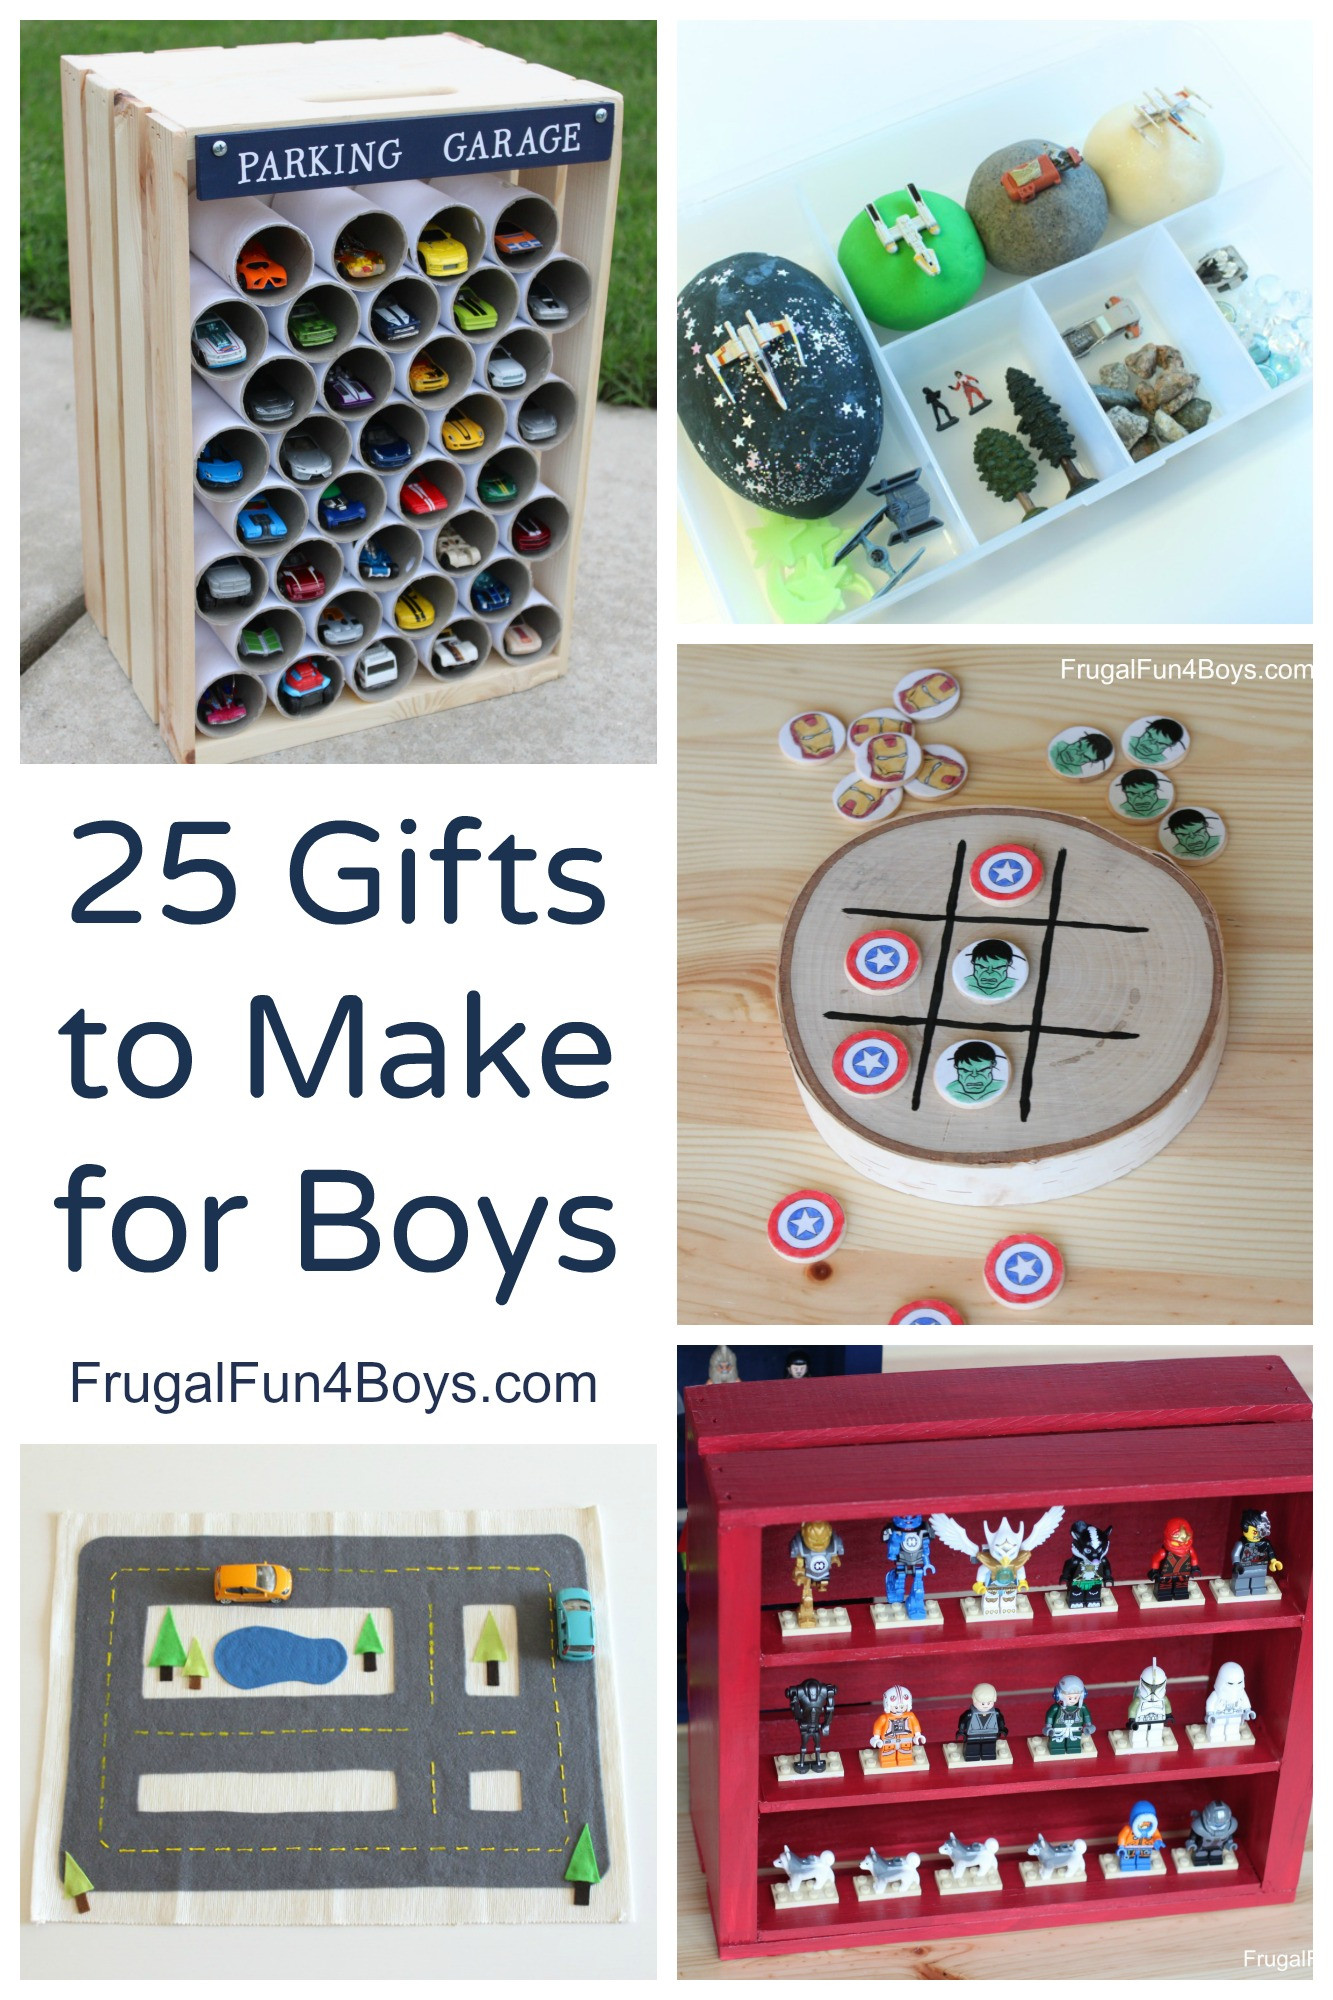 Diy Gift Ideas For Boys
 25 More Homemade Gifts to Make for Boys Frugal Fun For